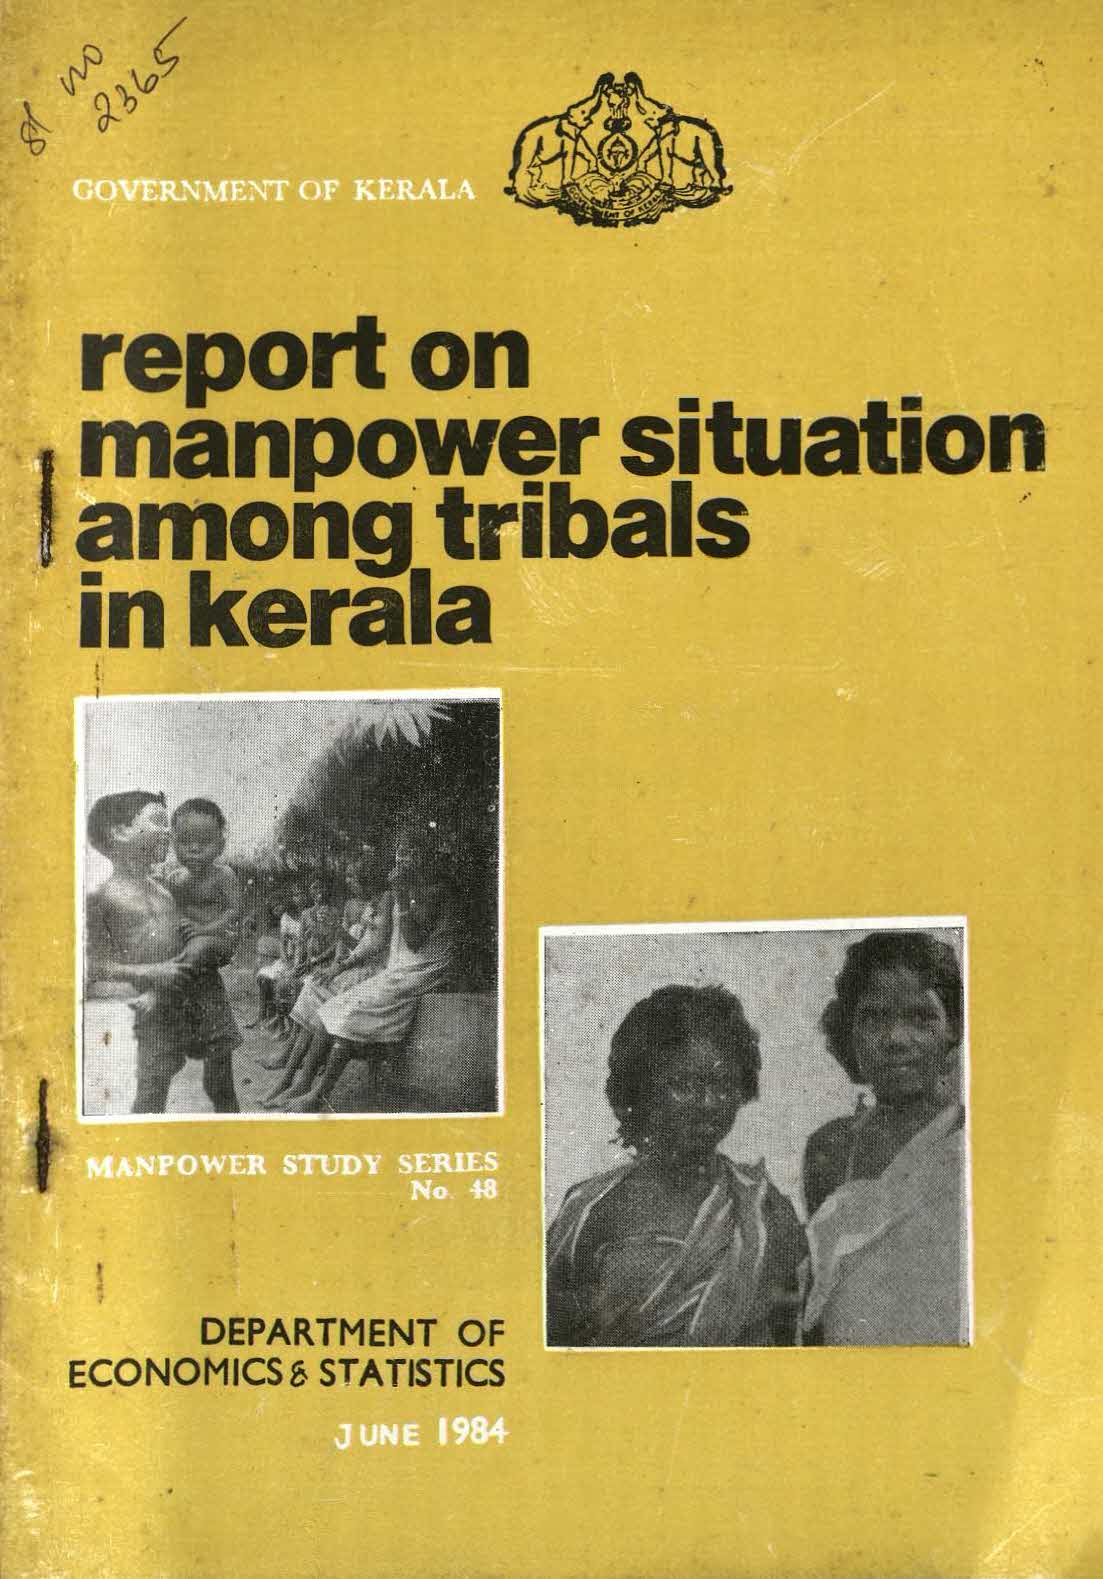 REPORT ON MANPOWER SITUATION AMONG TRIBALS IN KERALA